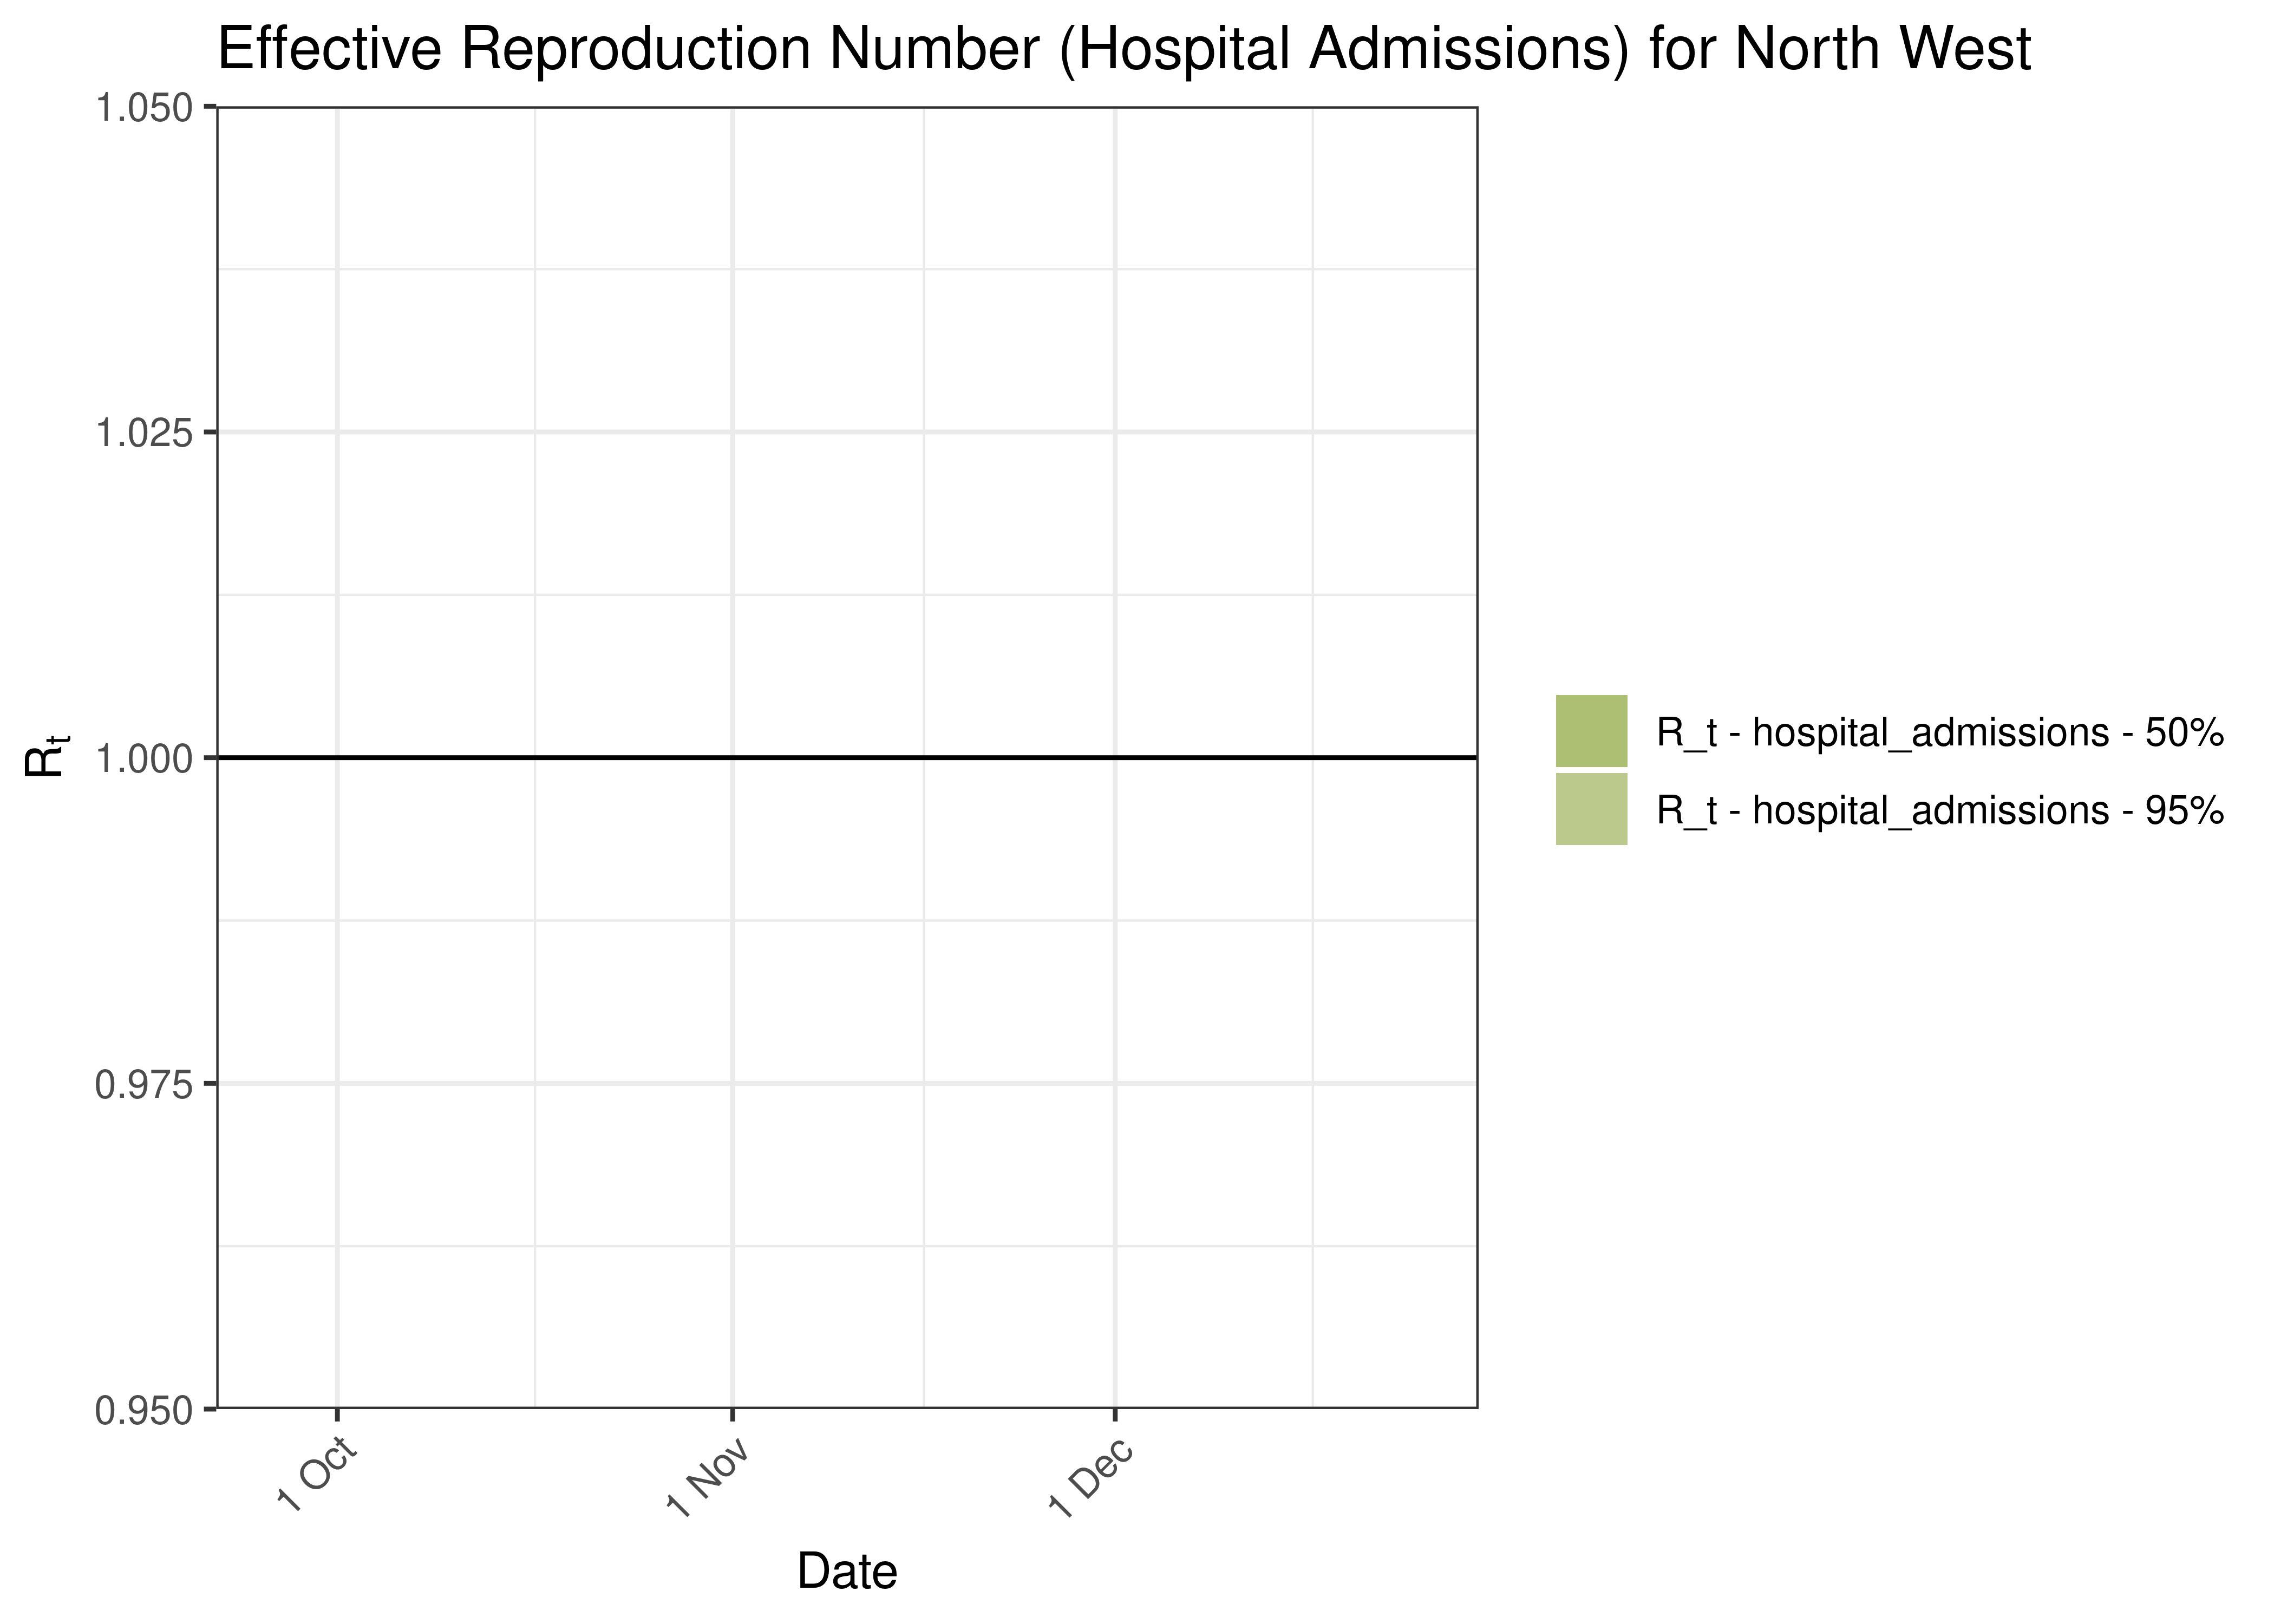 Estimated Effective Reproduction Number Based on Hospital Admissions for North West over last 90 days